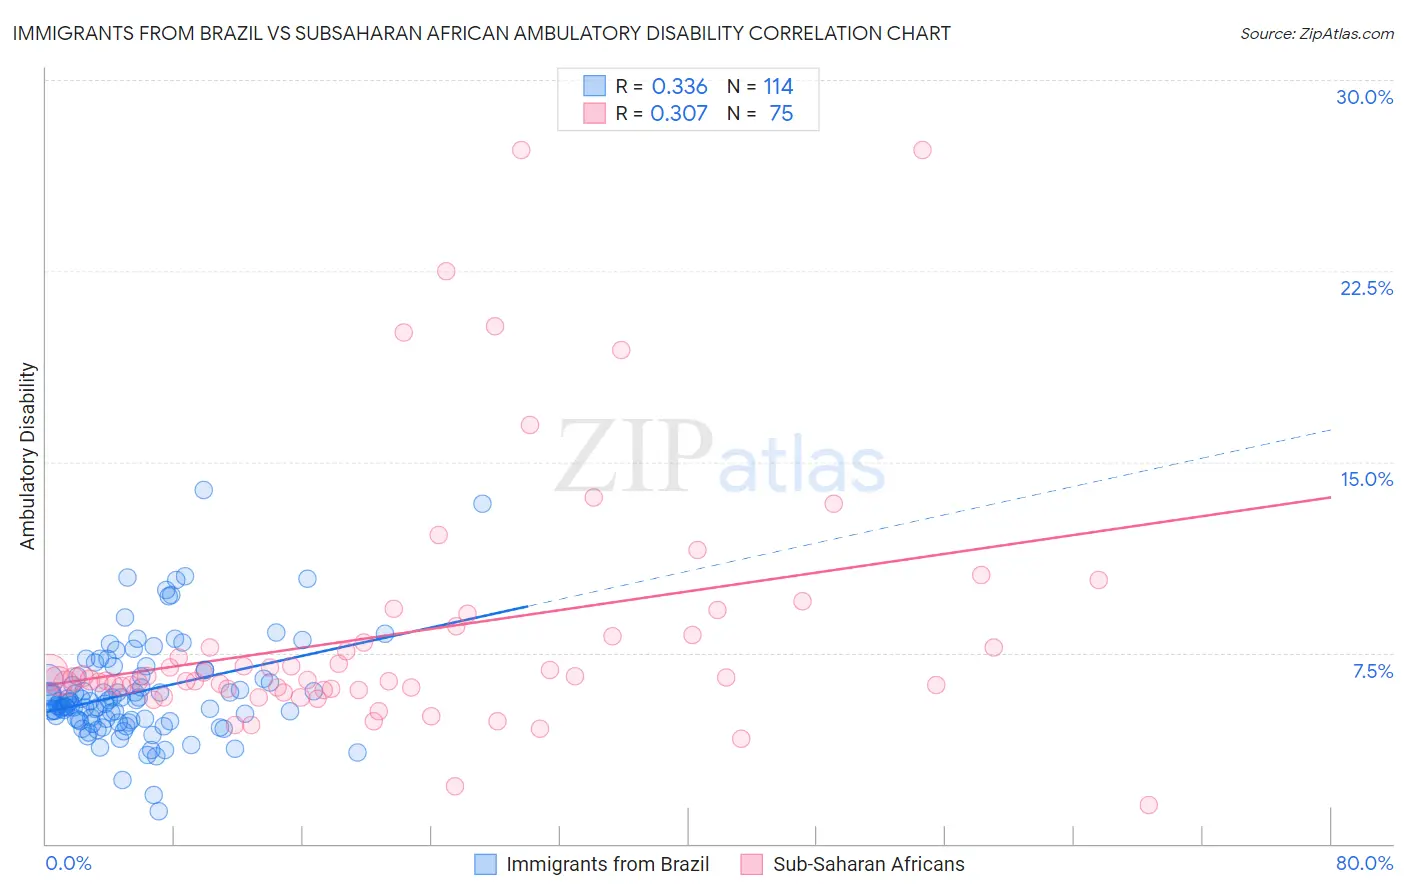 Immigrants from Brazil vs Subsaharan African Ambulatory Disability